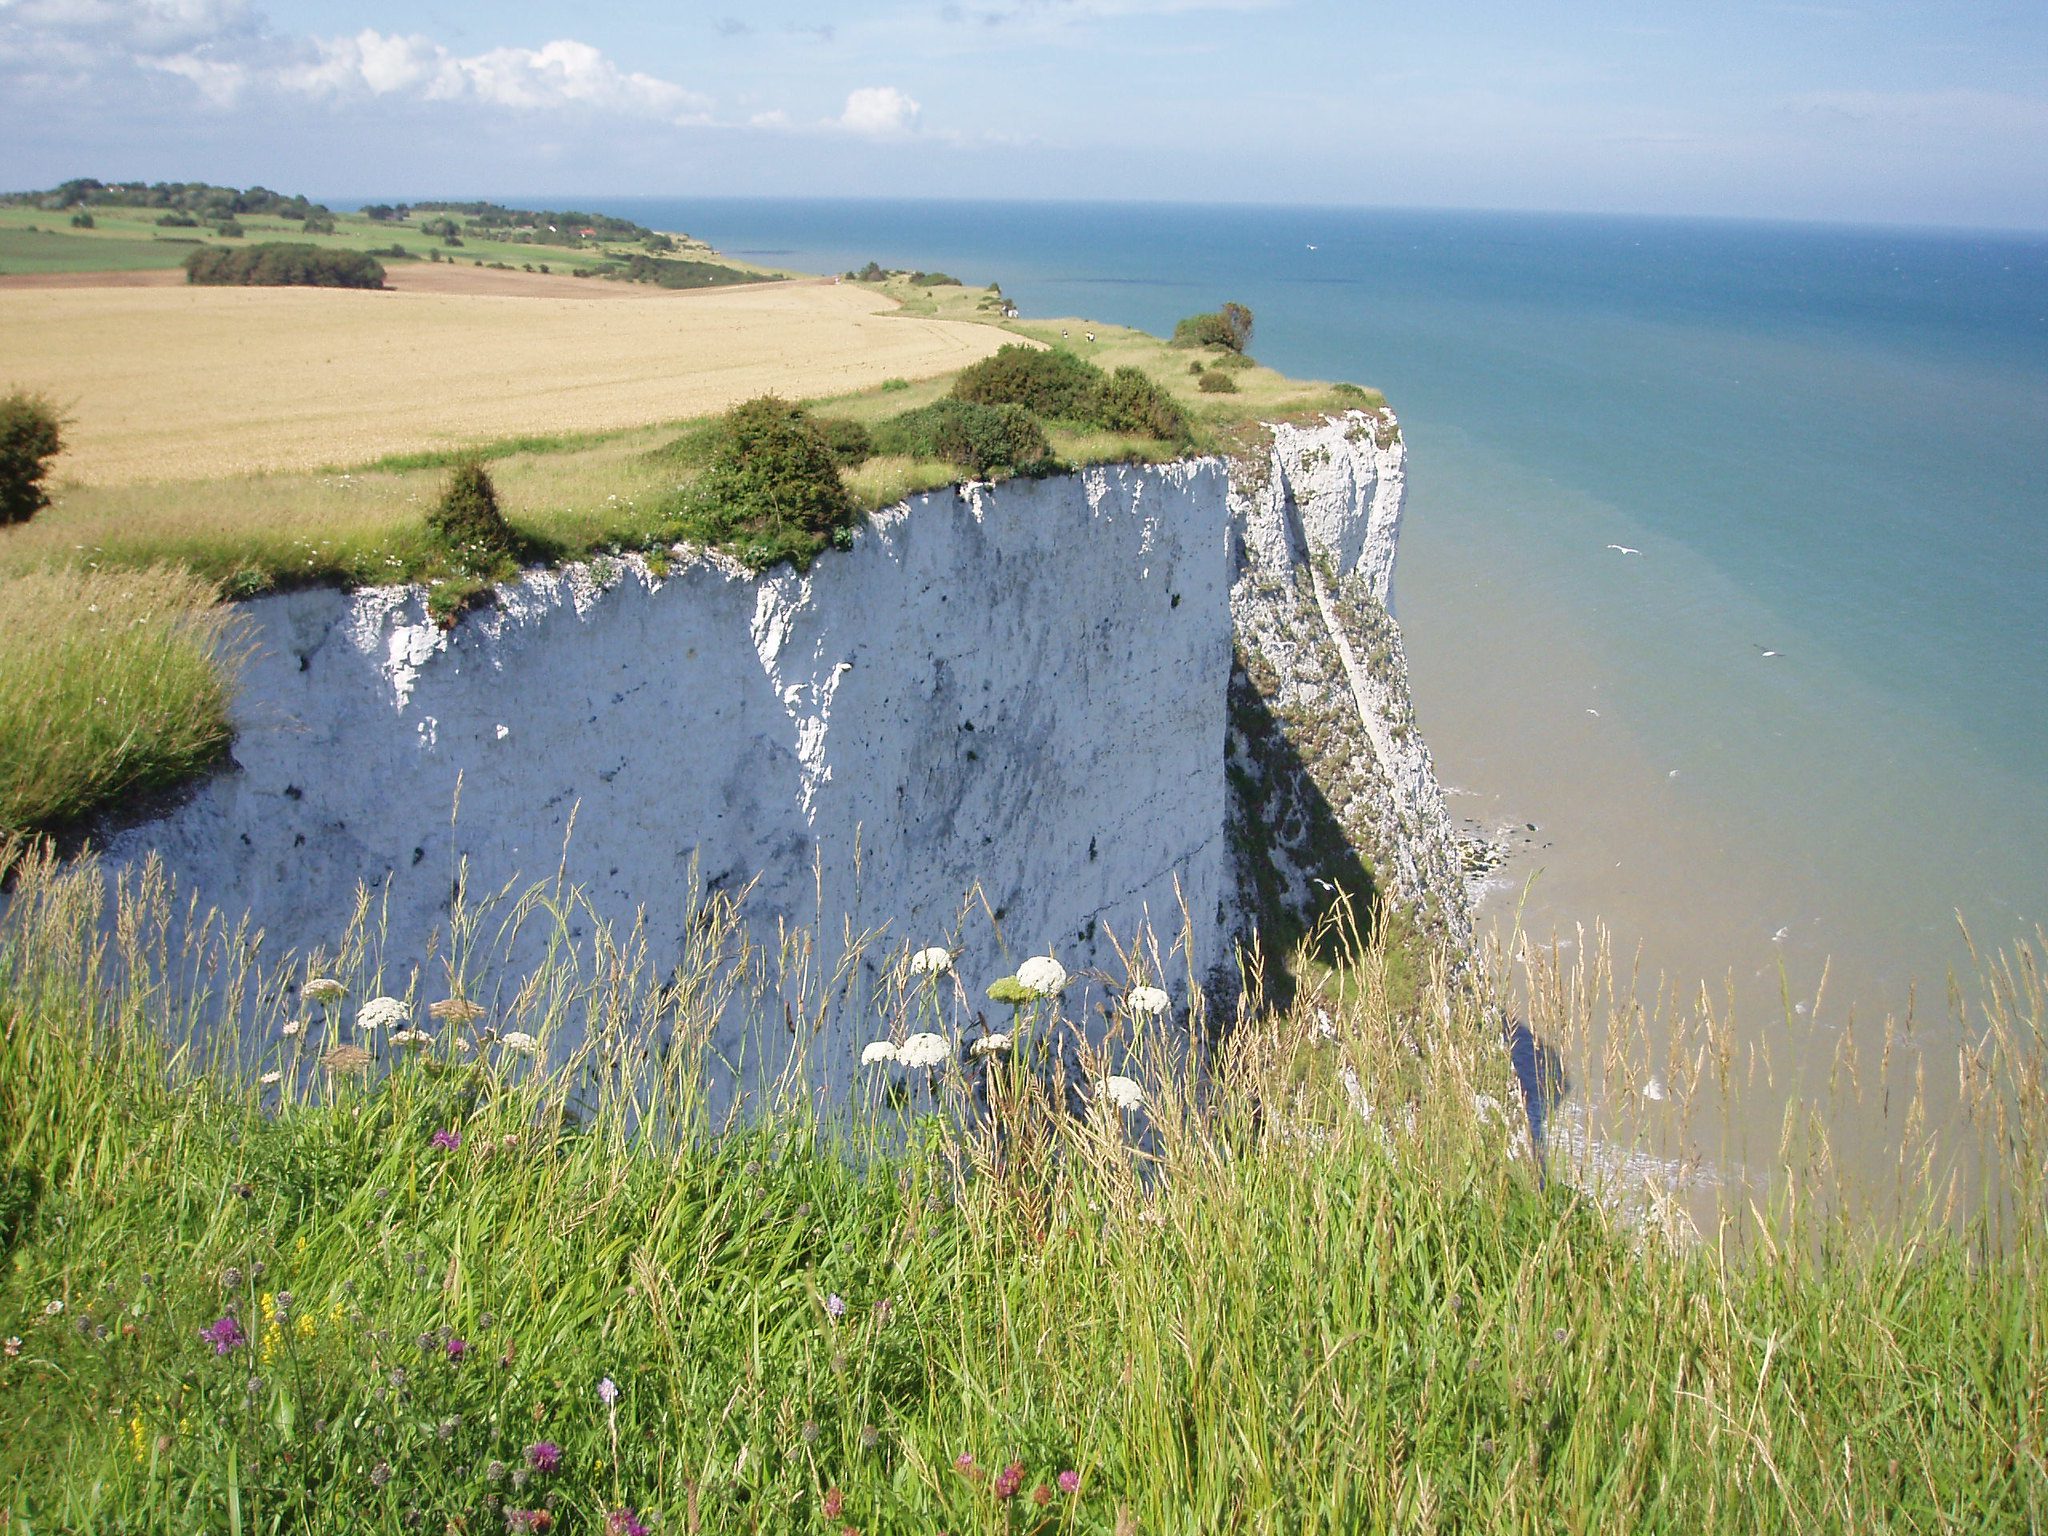 White Cliffs of Dover, with the sea on the right, on a sunny day. With wild flowers in the foreground.